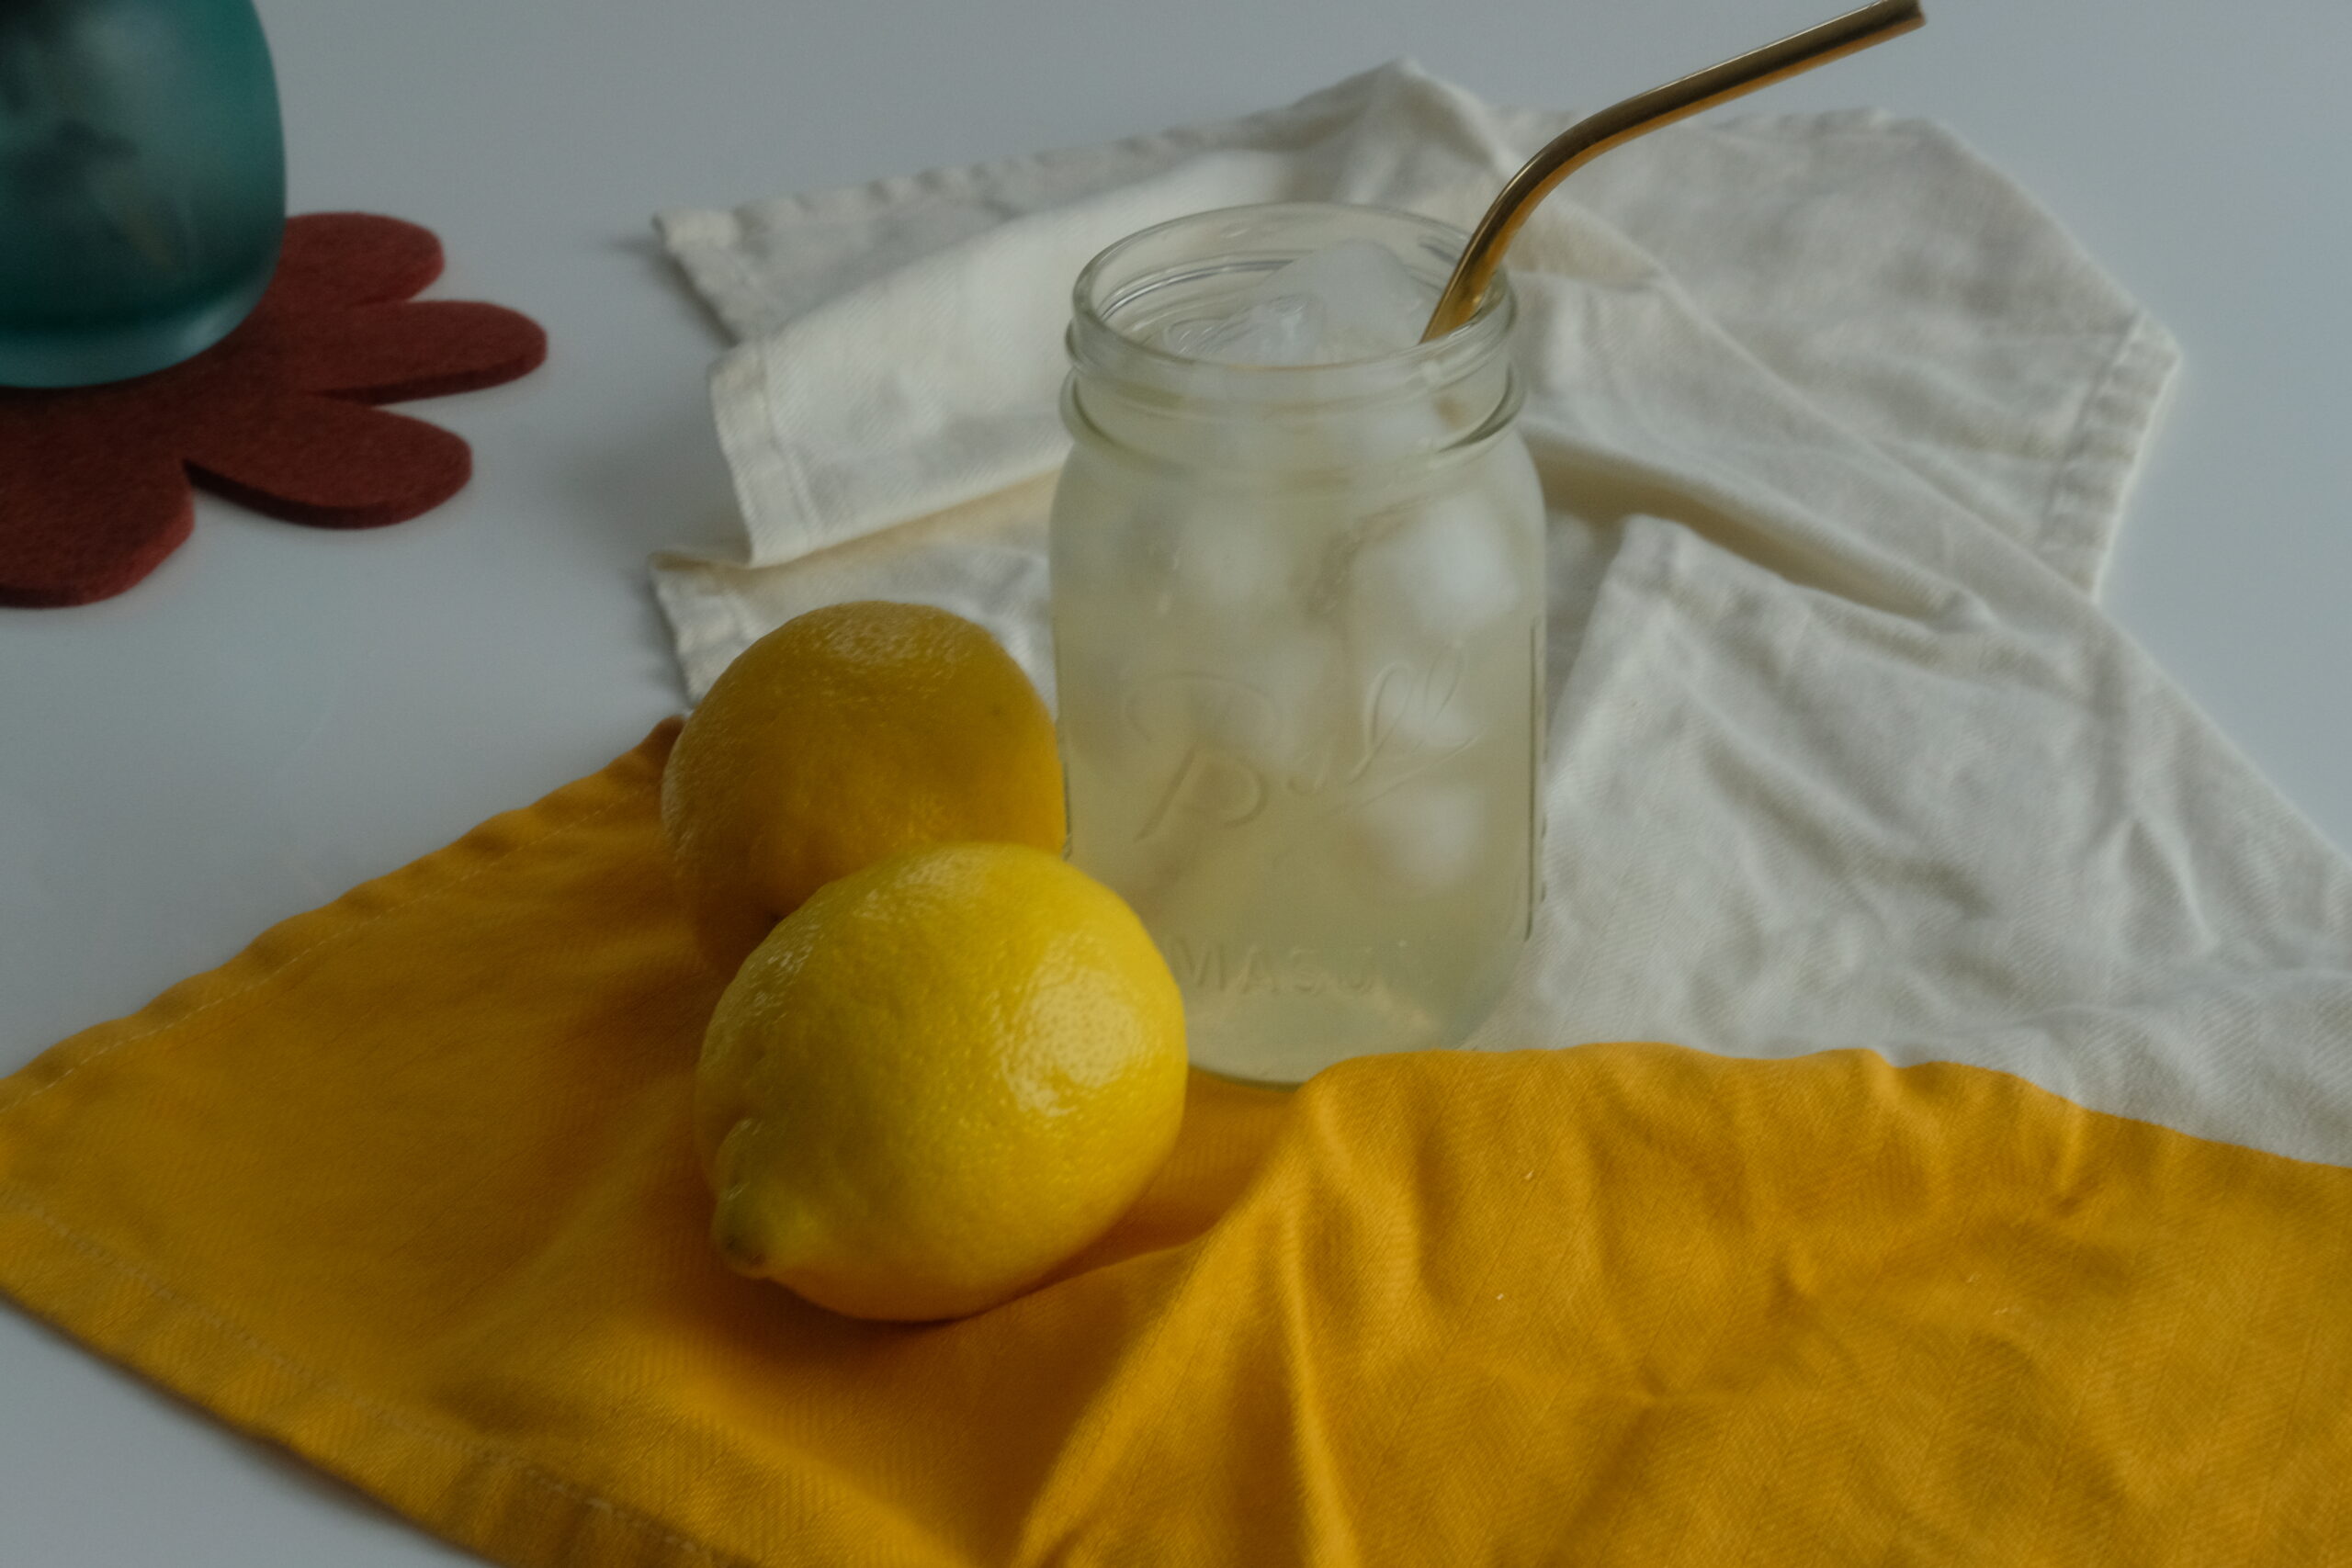 What’s better than Chick-fil-A’s ice cold lemonade? Our homemade Single-Serving Lemonade recipe, of course.